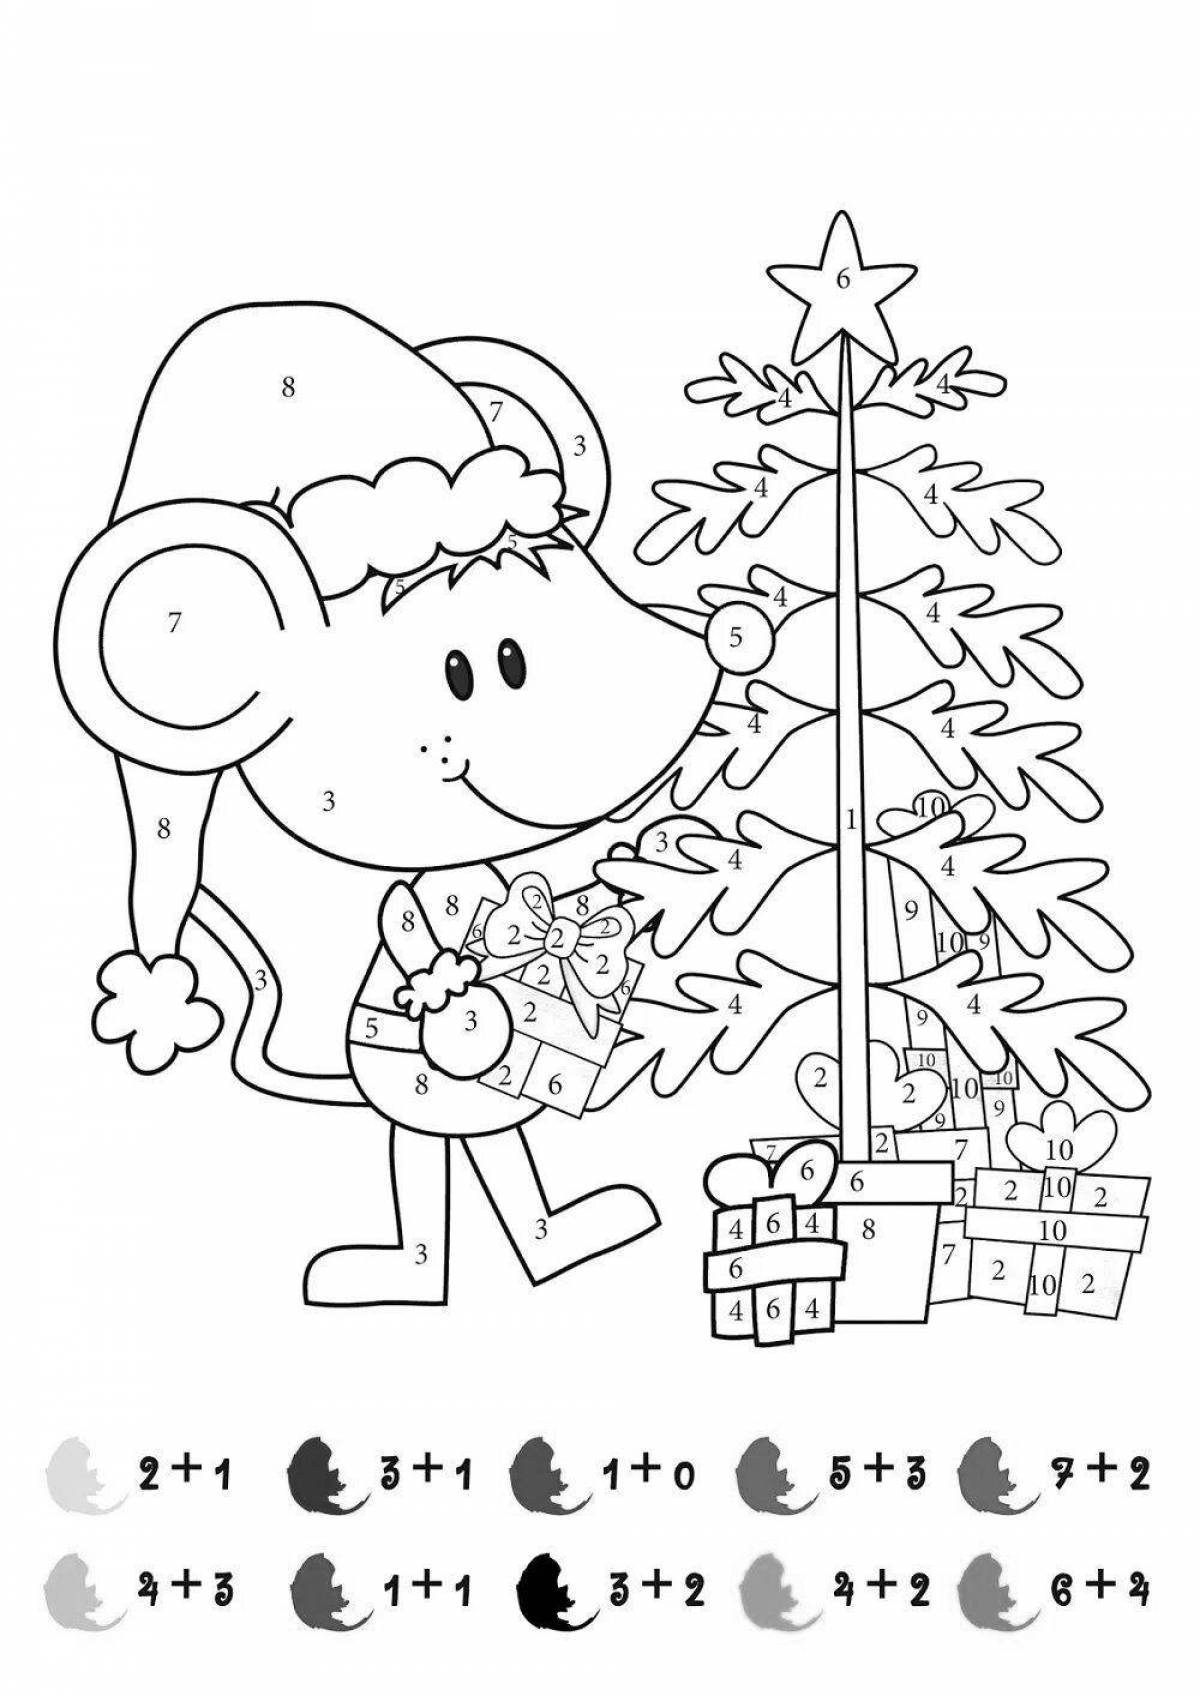 Christmas tree live coloring by numbers